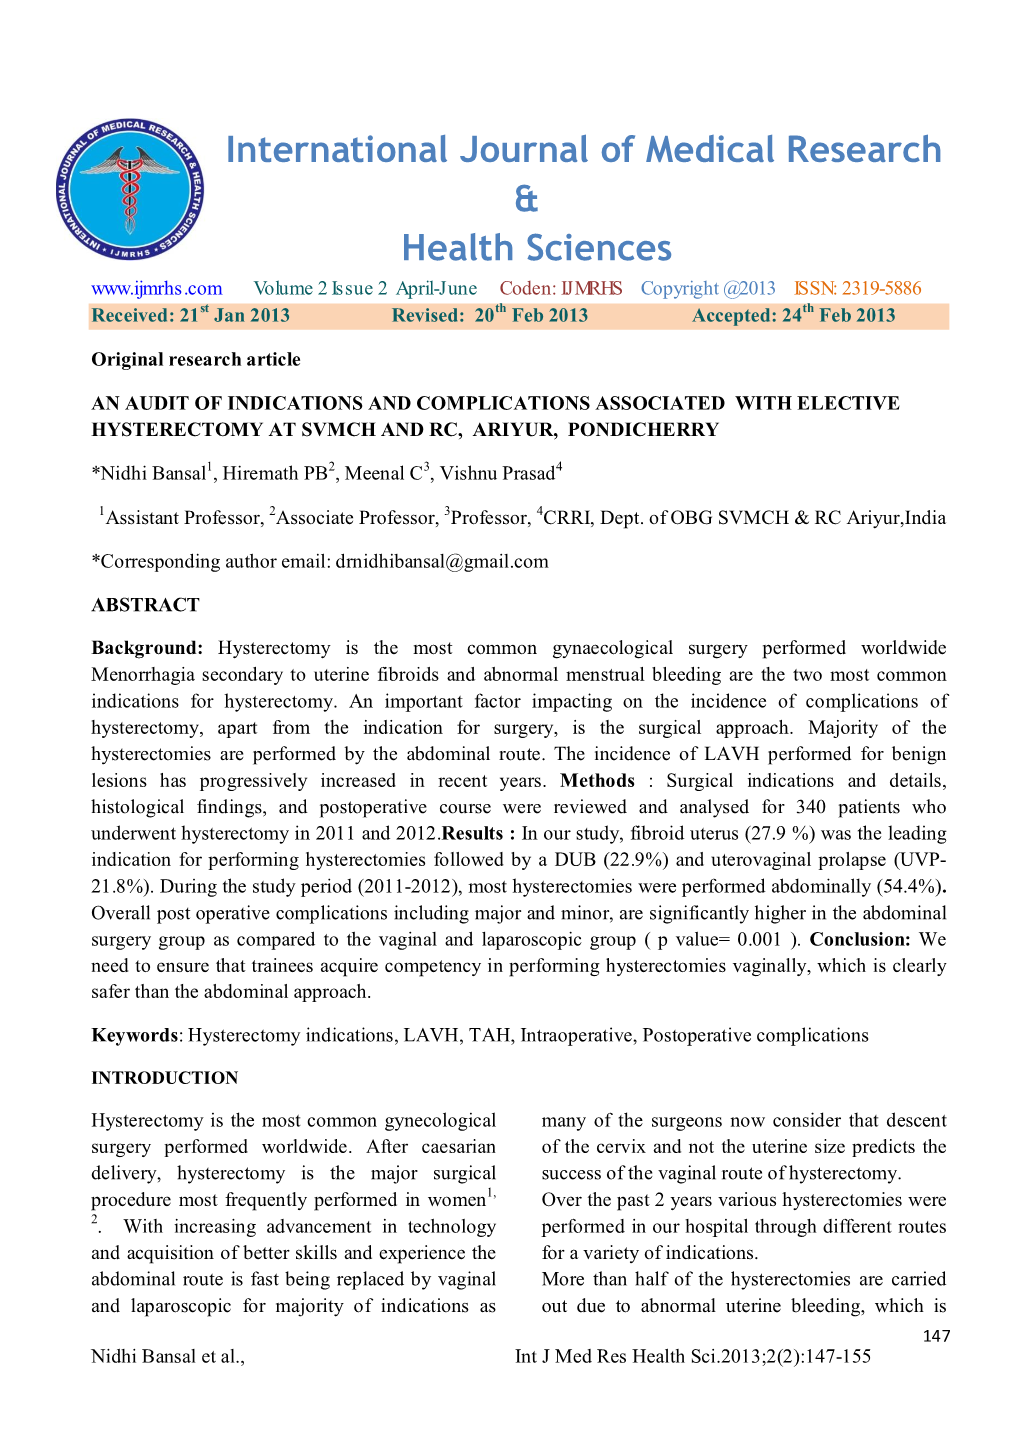 International Journal of Medical Research & Health Sciences